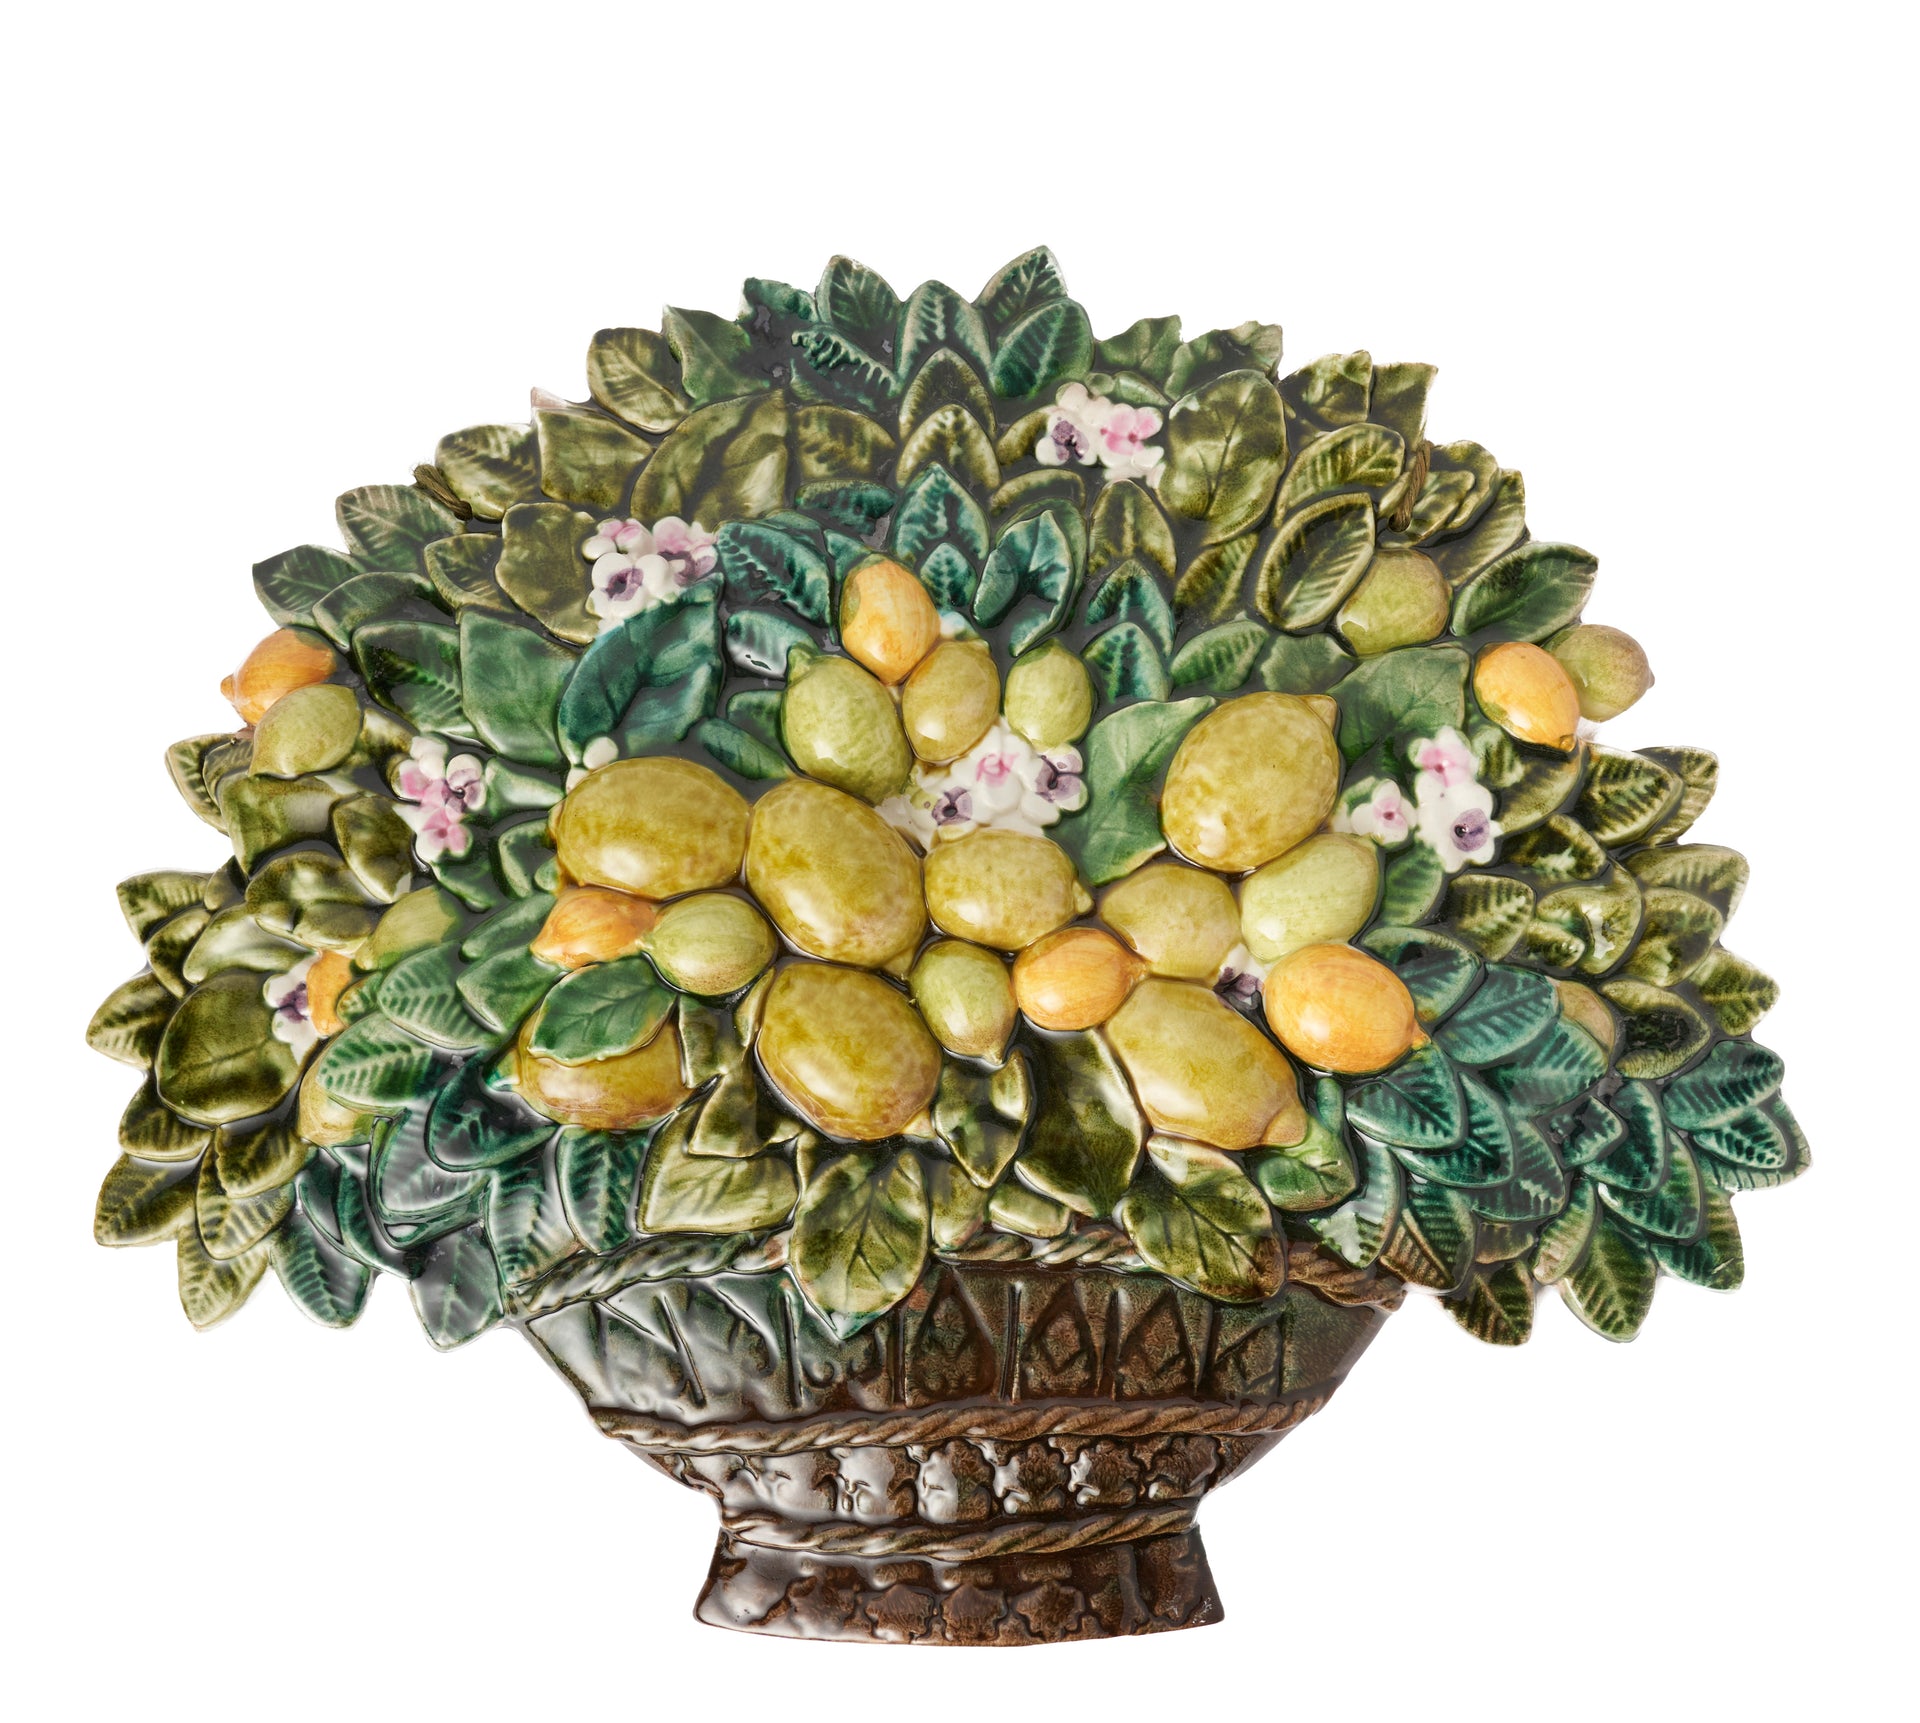 SOLD An outstanding glazed ceramic wall plaque in the form of a basket of lemons and leaves, Italian circa 1950